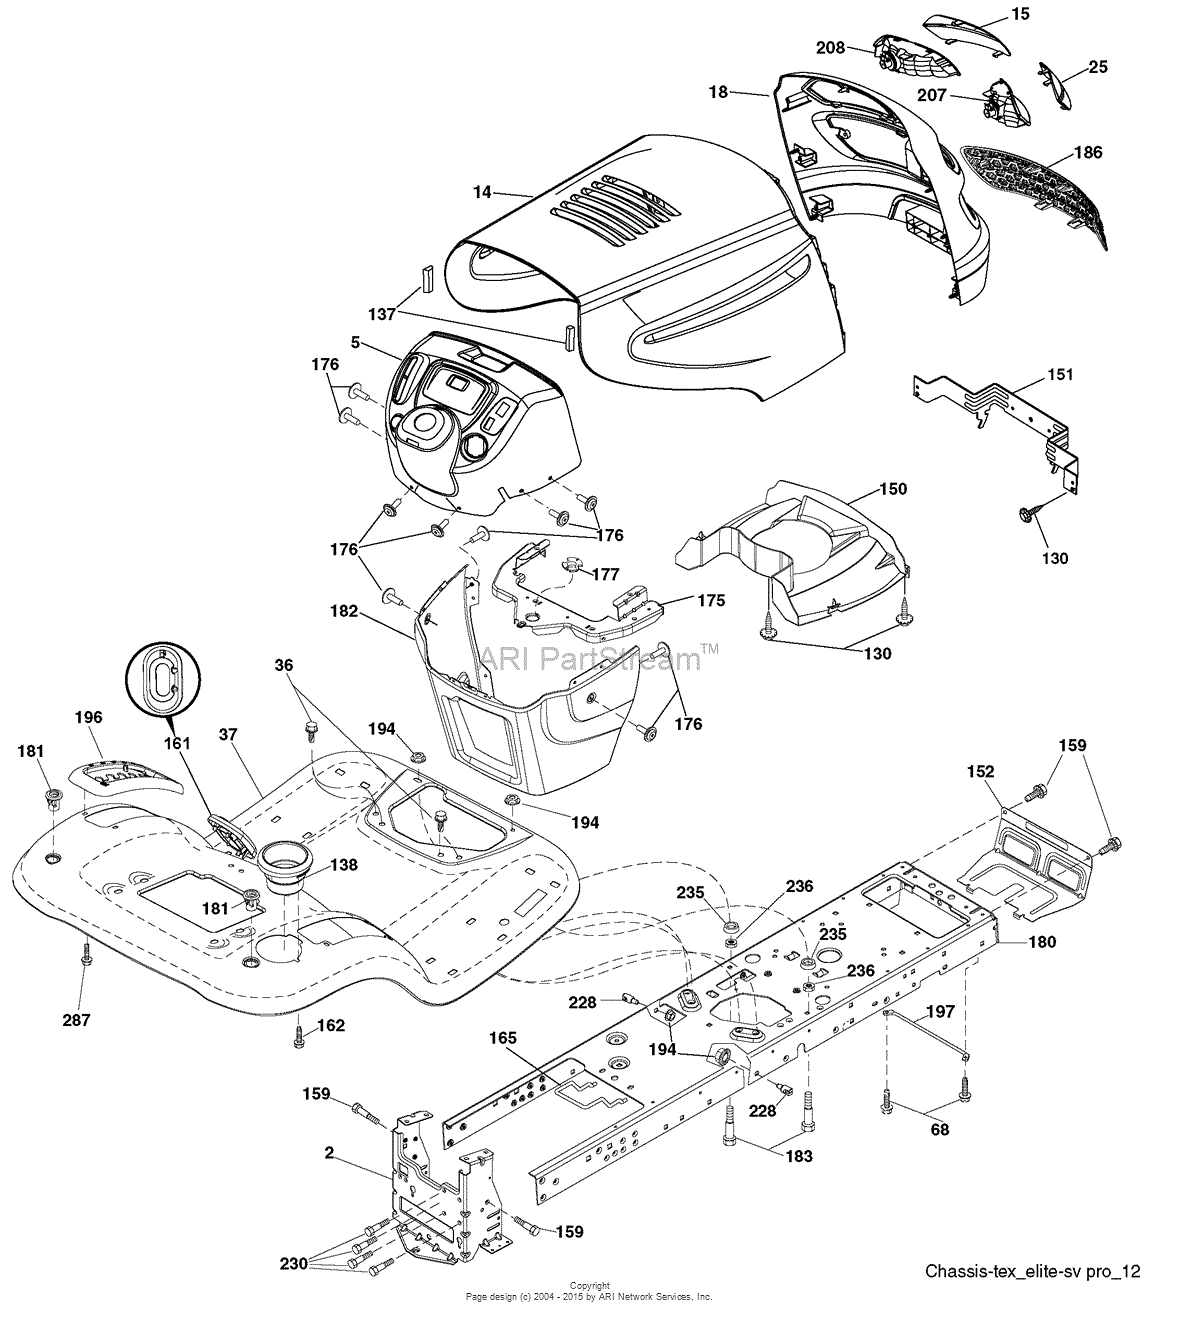 AYP/Electrolux PB22H46YT, 96042003801 (2008-01) Parts Diagram for Chassis